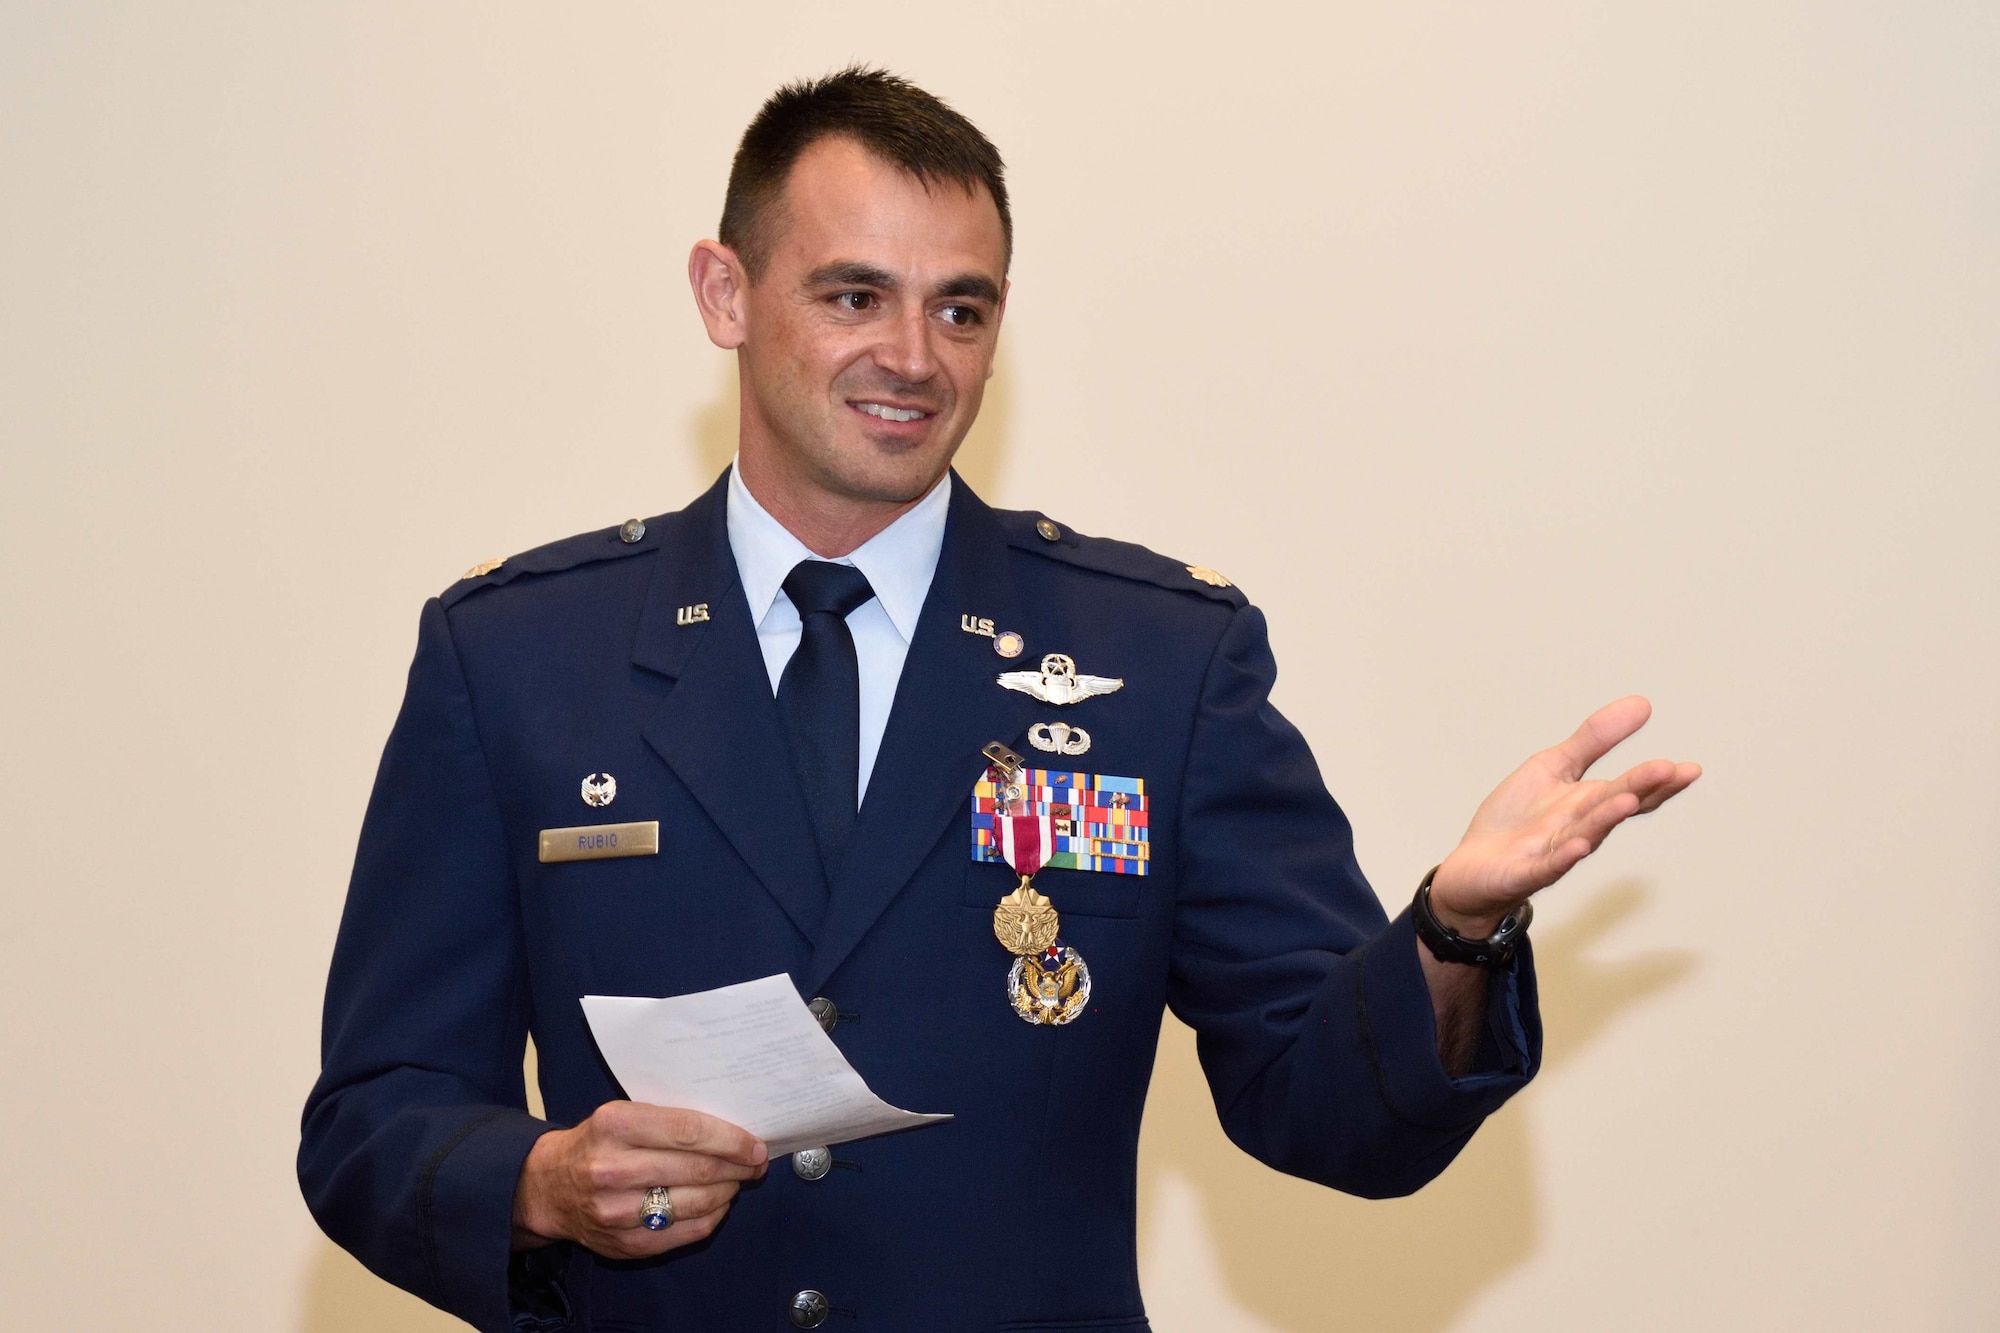 Lt. Col. Stuart M. Rubio, commander of the Air Force Reserve’s 815th Airlift Squadron “Flying Jennies” speaks at his retirement ceremony held July 28, 2018, at the Roberts Consolidated Maintenance Facility, Keesler Air Force Base, Mississippi. Rubio, an active-duty C-130 pilot who has been commander of the Flying Jennies since February of 2016, will still continue to serve as commander of the squadron, but instead as a reservist as part of the Regular Air Force to Air Force Reserve Program. (U.S. Air Force photo by Tech. Sgt. Ryan Labadens)